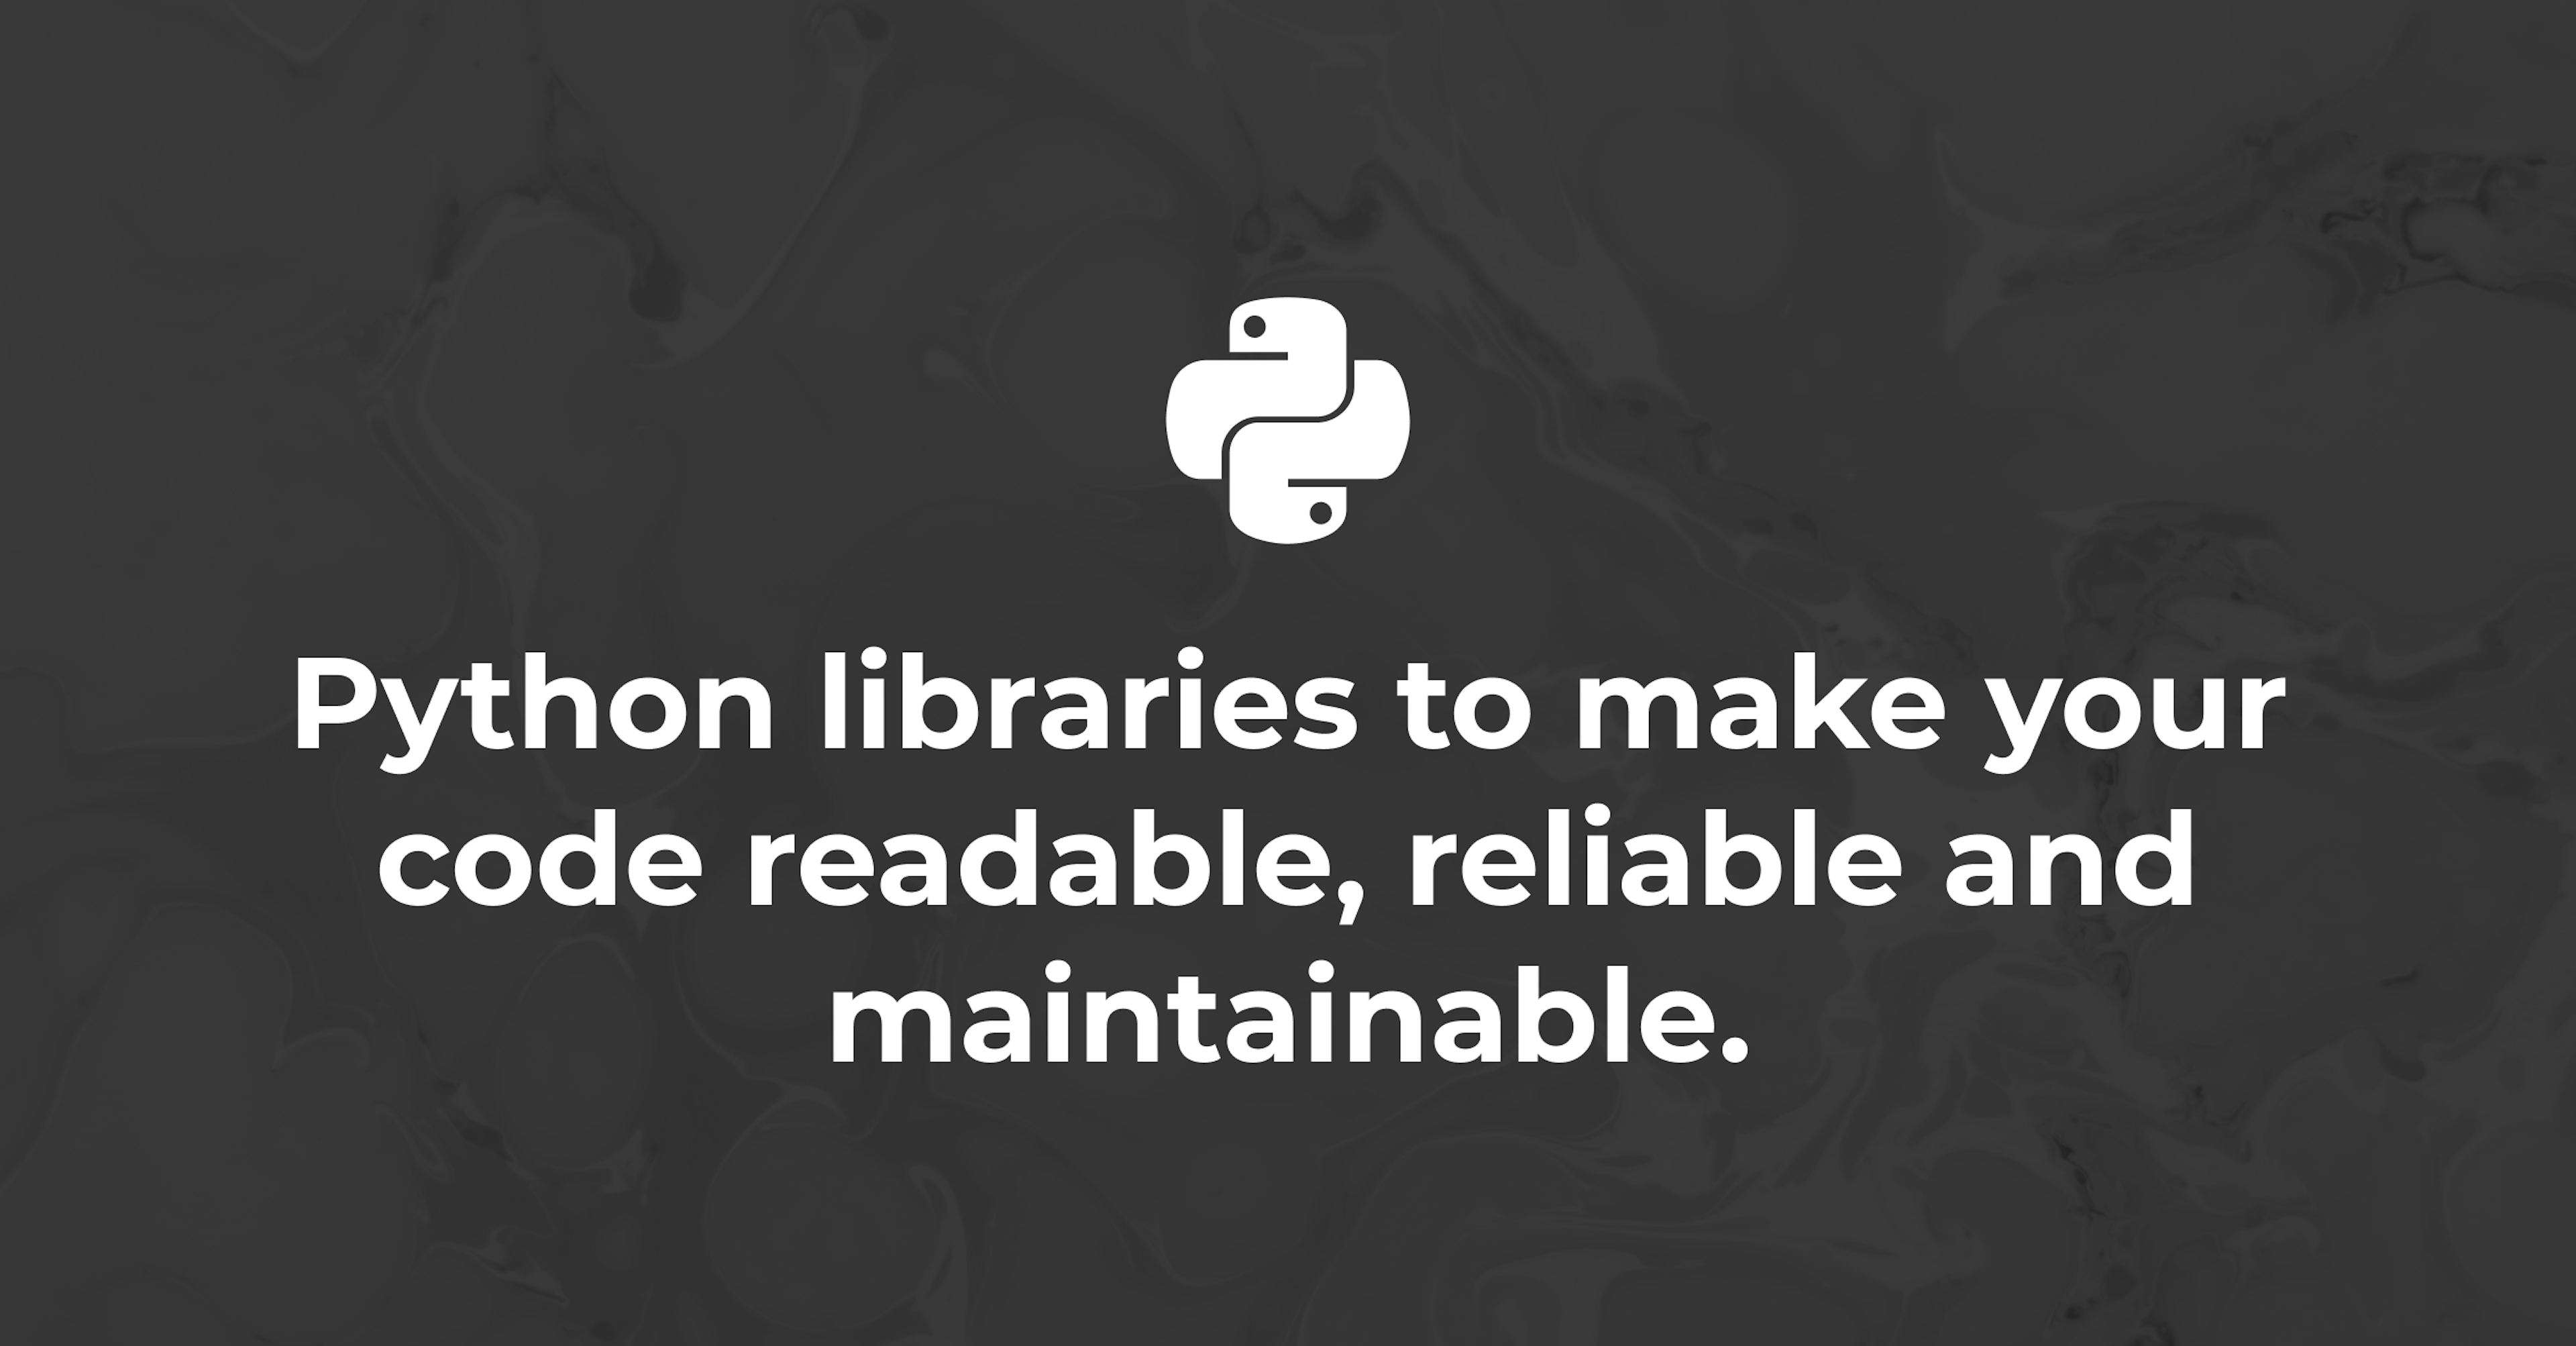 Python libraries to make your code readable, reliable and maintainable.